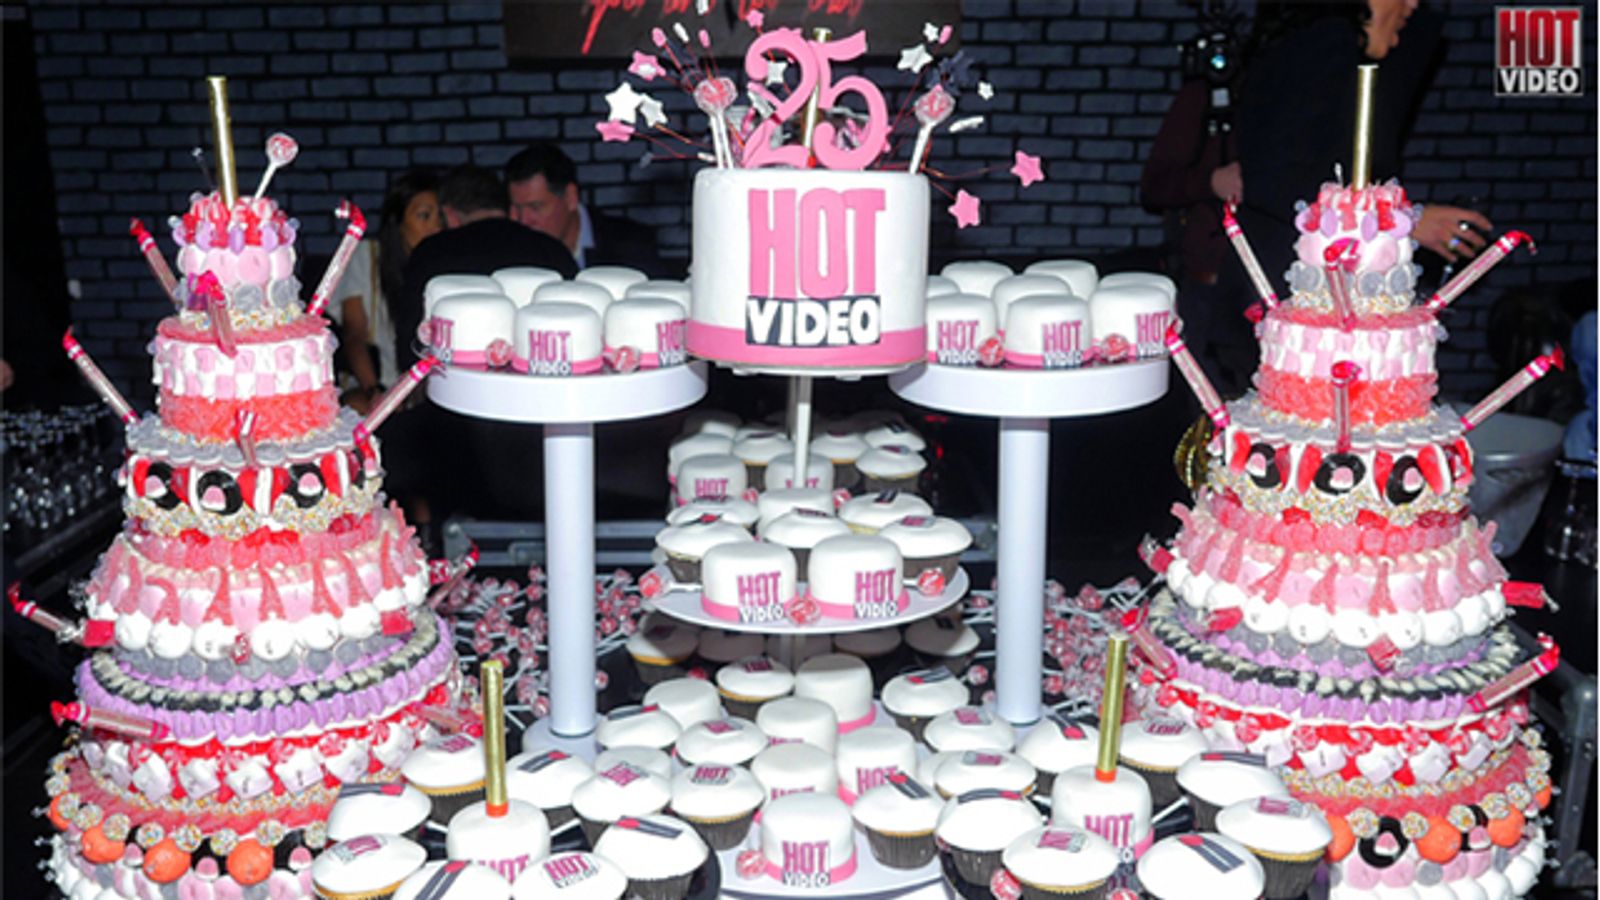 Hot Video Marks 25th Birthday With Star-Studded Party